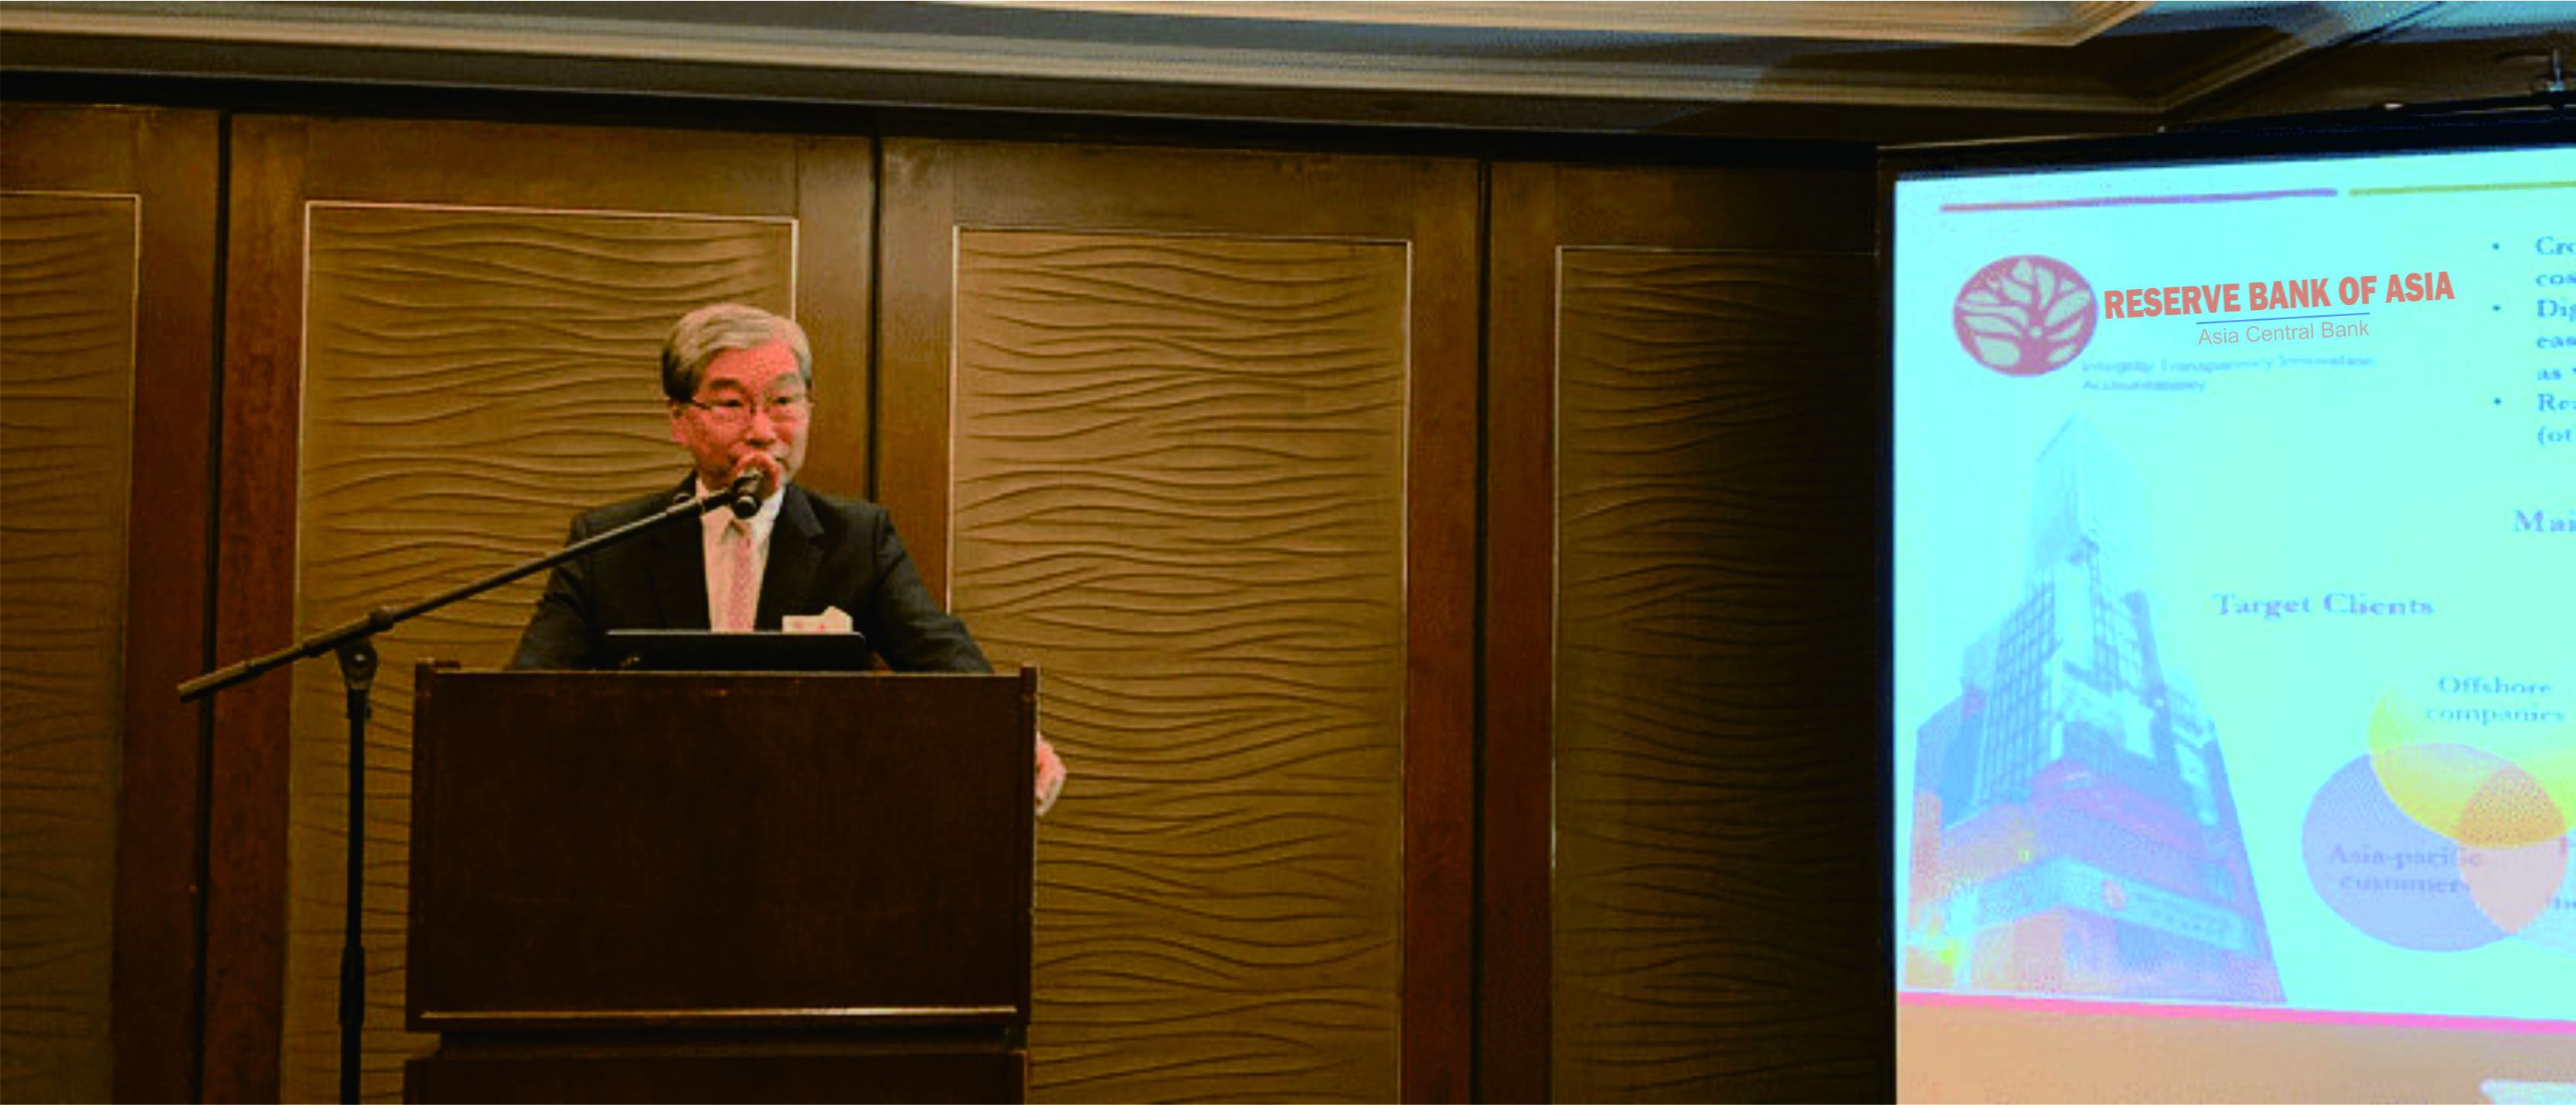 Bank of Asia and BVI House Asia held an Information briefing at The Hong Kong Bankers Club